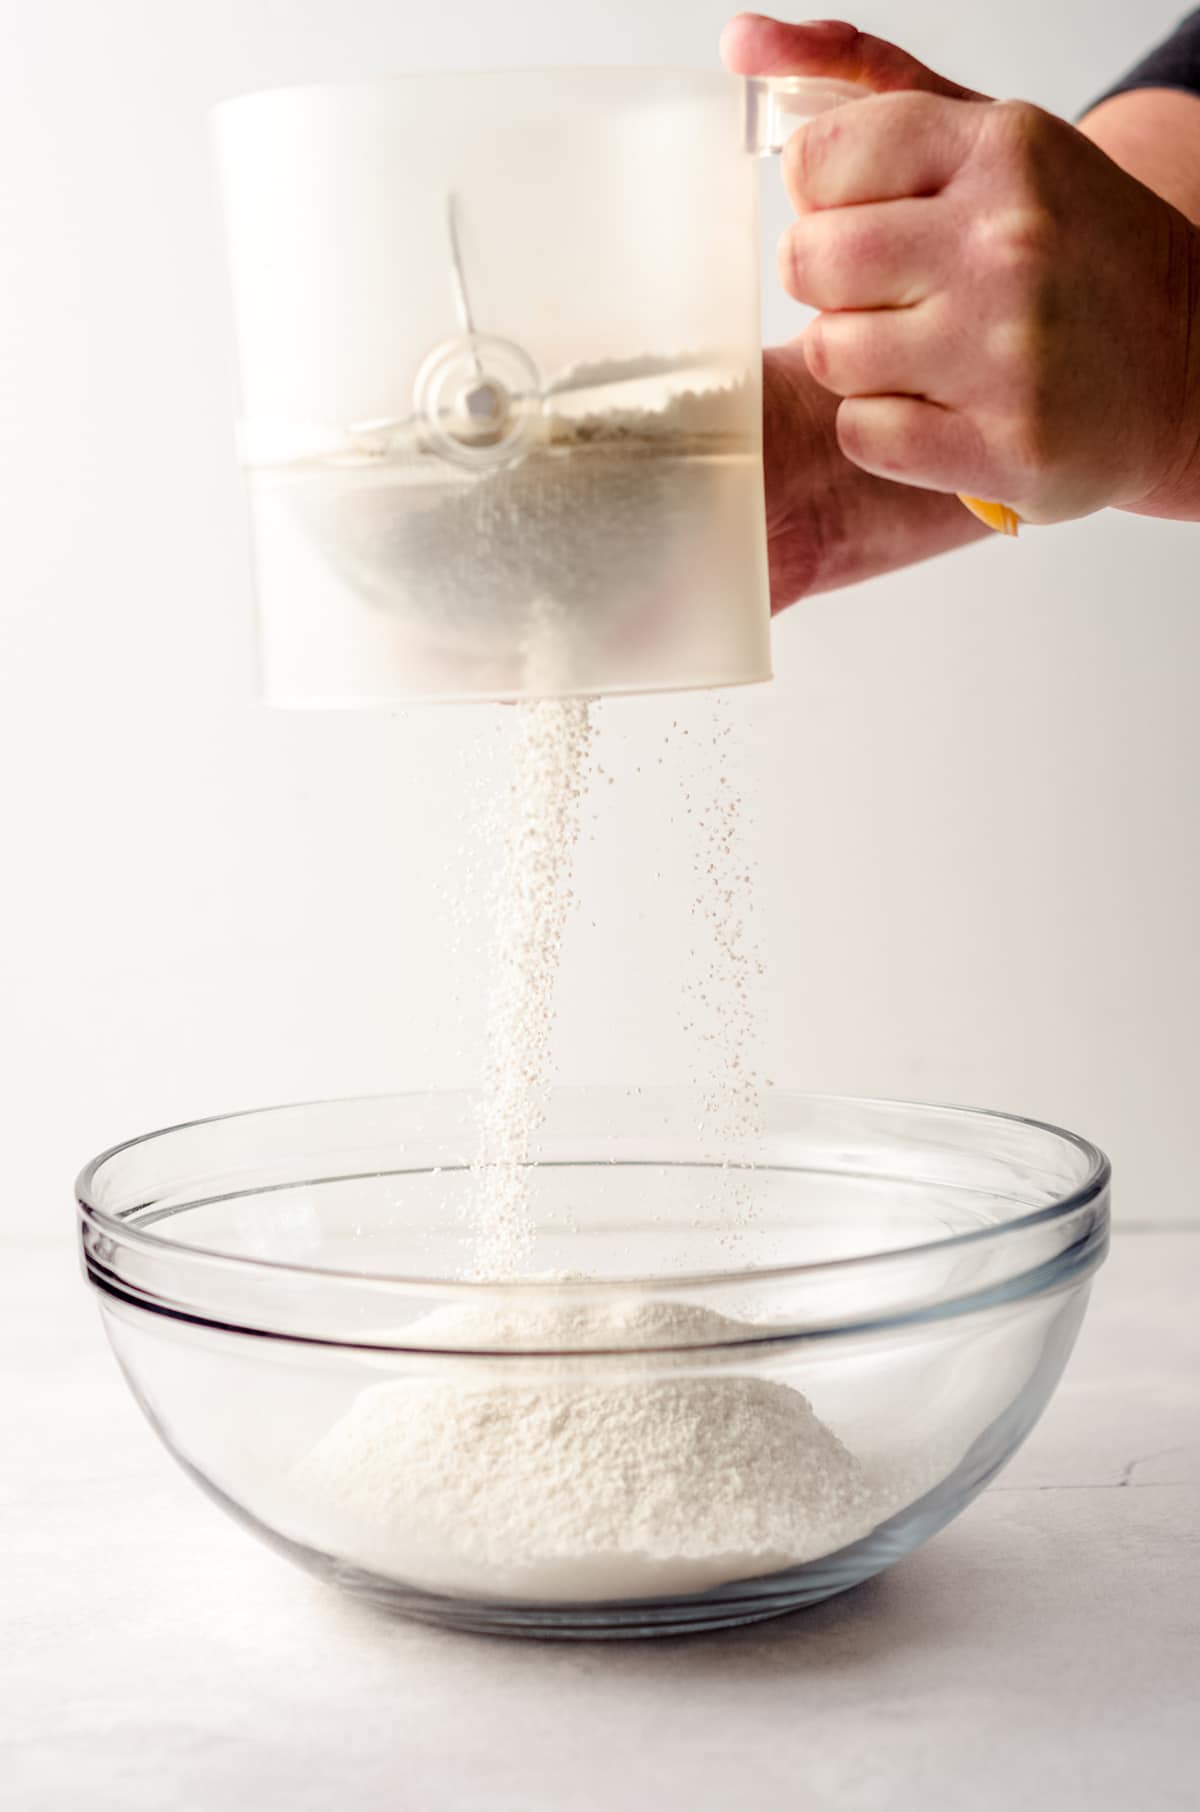 sifting flour and dry ingredients together into a bowl